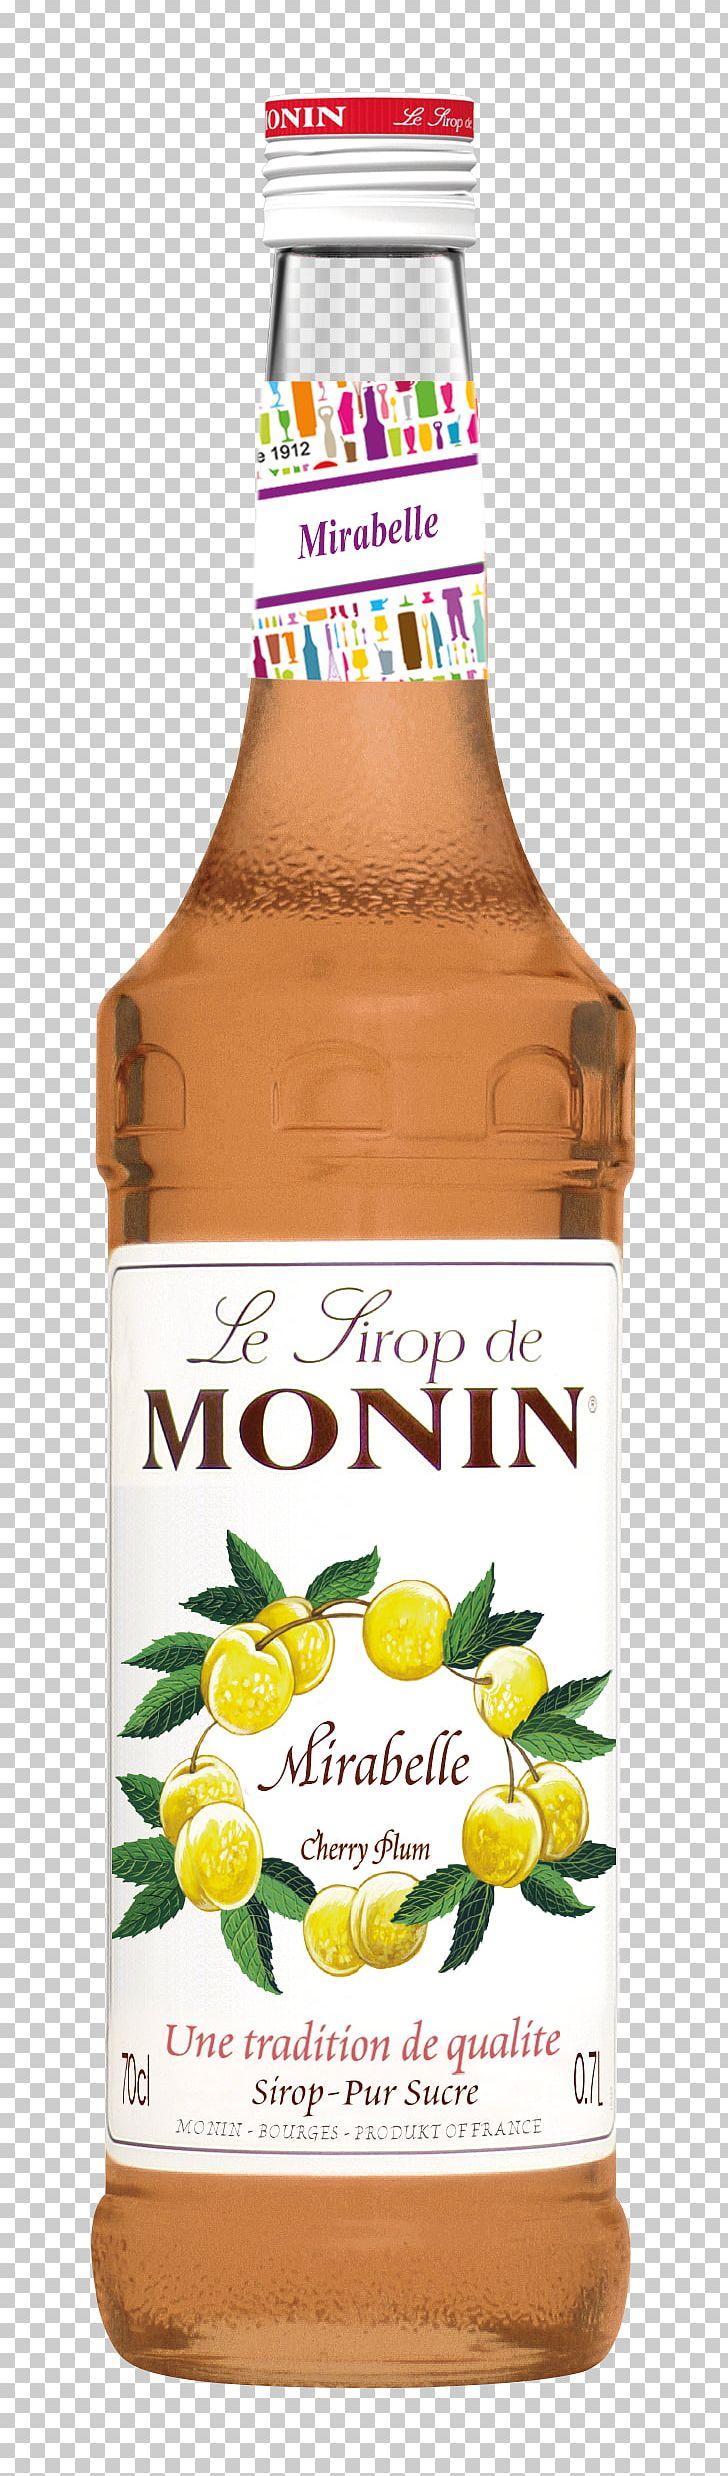 Cocktail White Chocolate Syrup GEORGES MONIN SAS Mirabelle Plum PNG, Clipart, Bartender, Caramel, Cherry Plum, Chocolate, Cocktail Free PNG Download